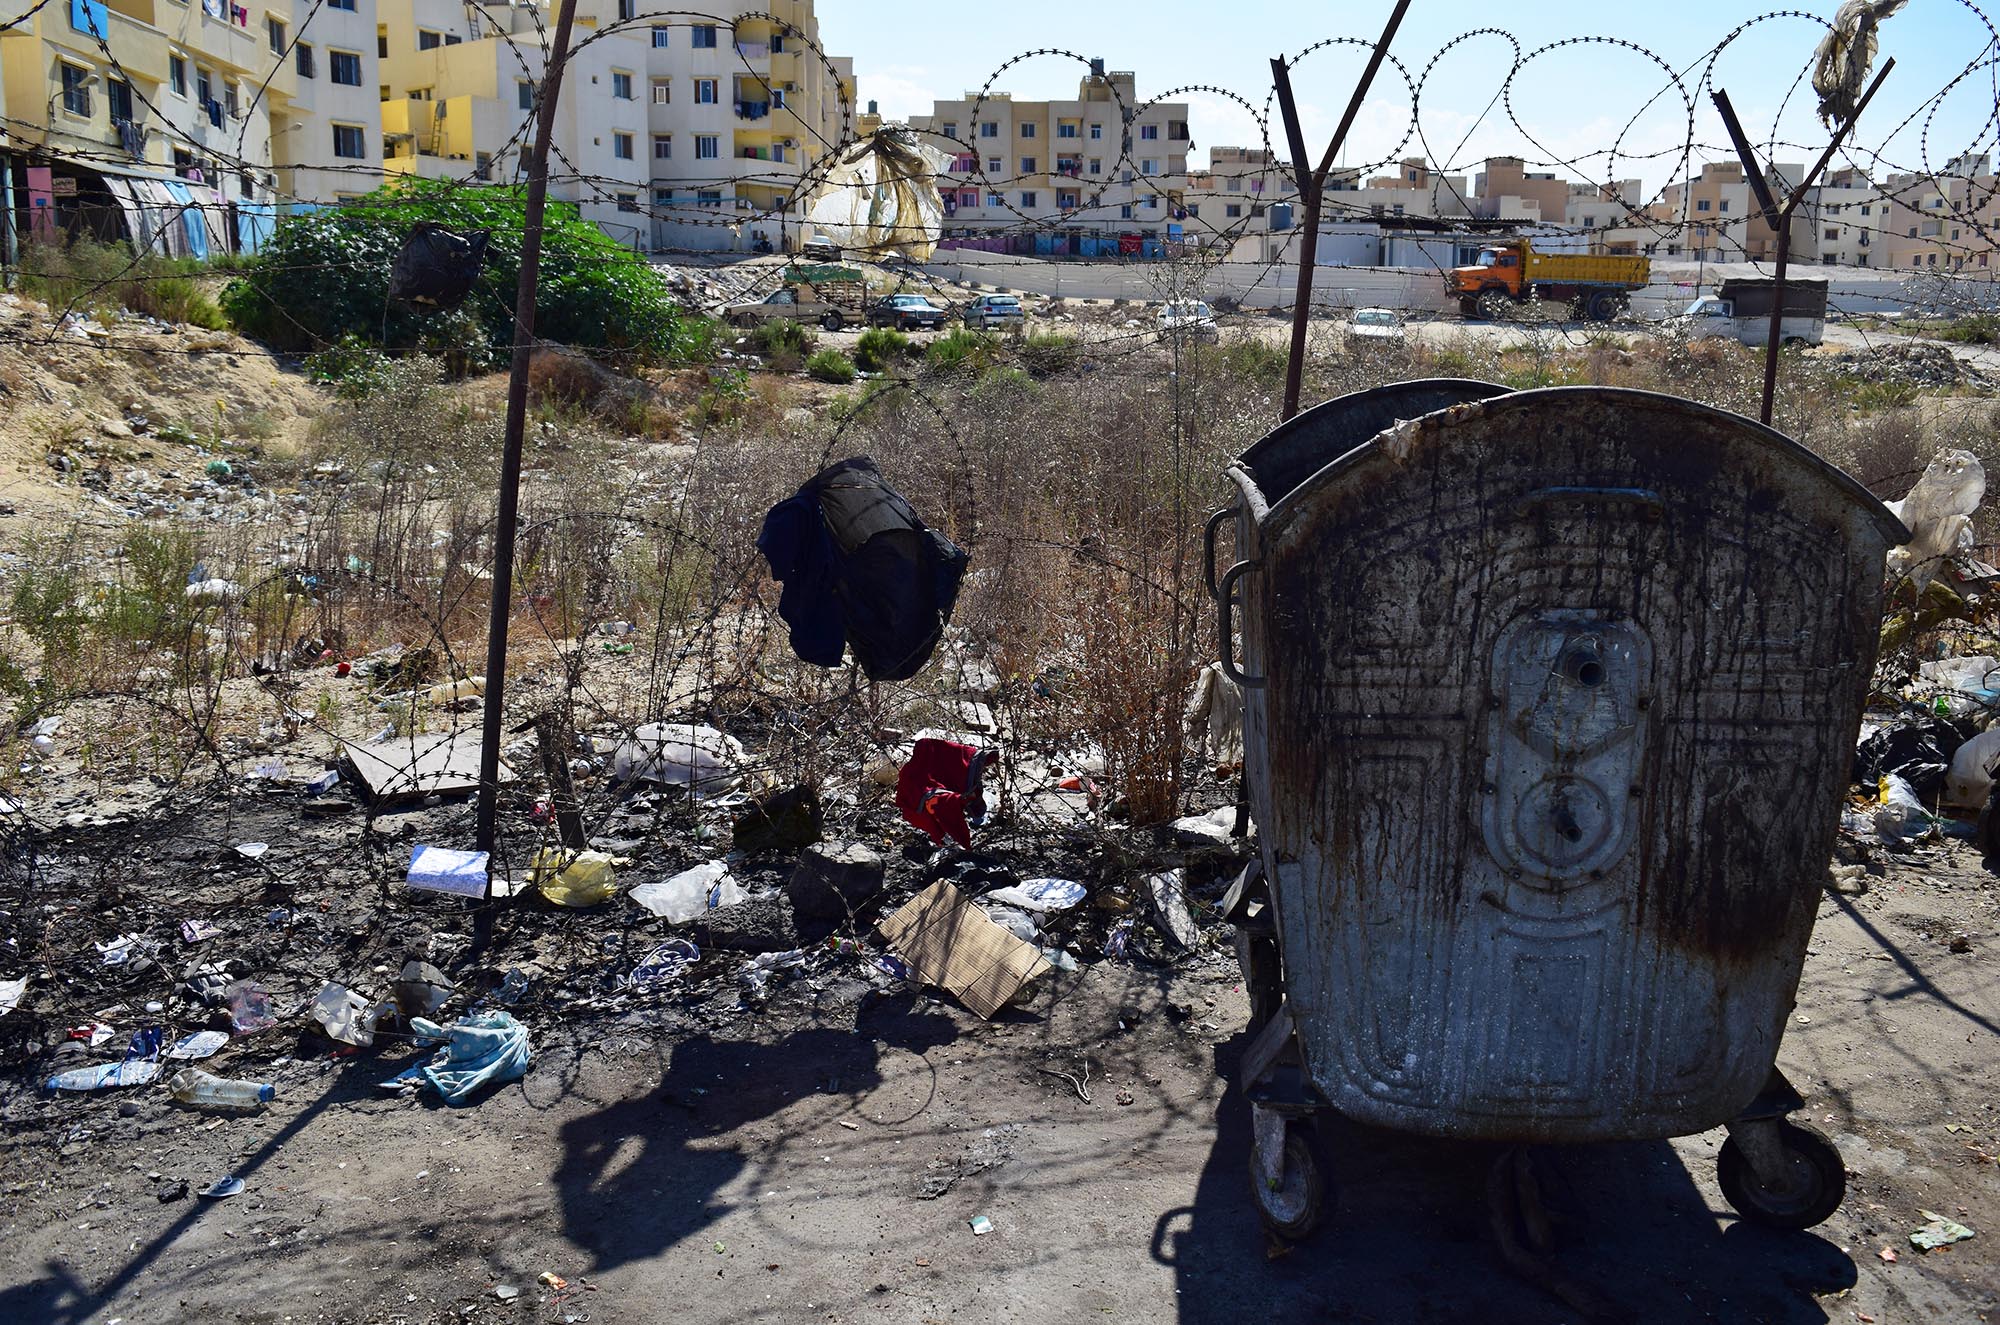 Like much of Lebanon, the refugee camp of Nahr El Bared has experienced a trash crisis with limited disposal capabilities.